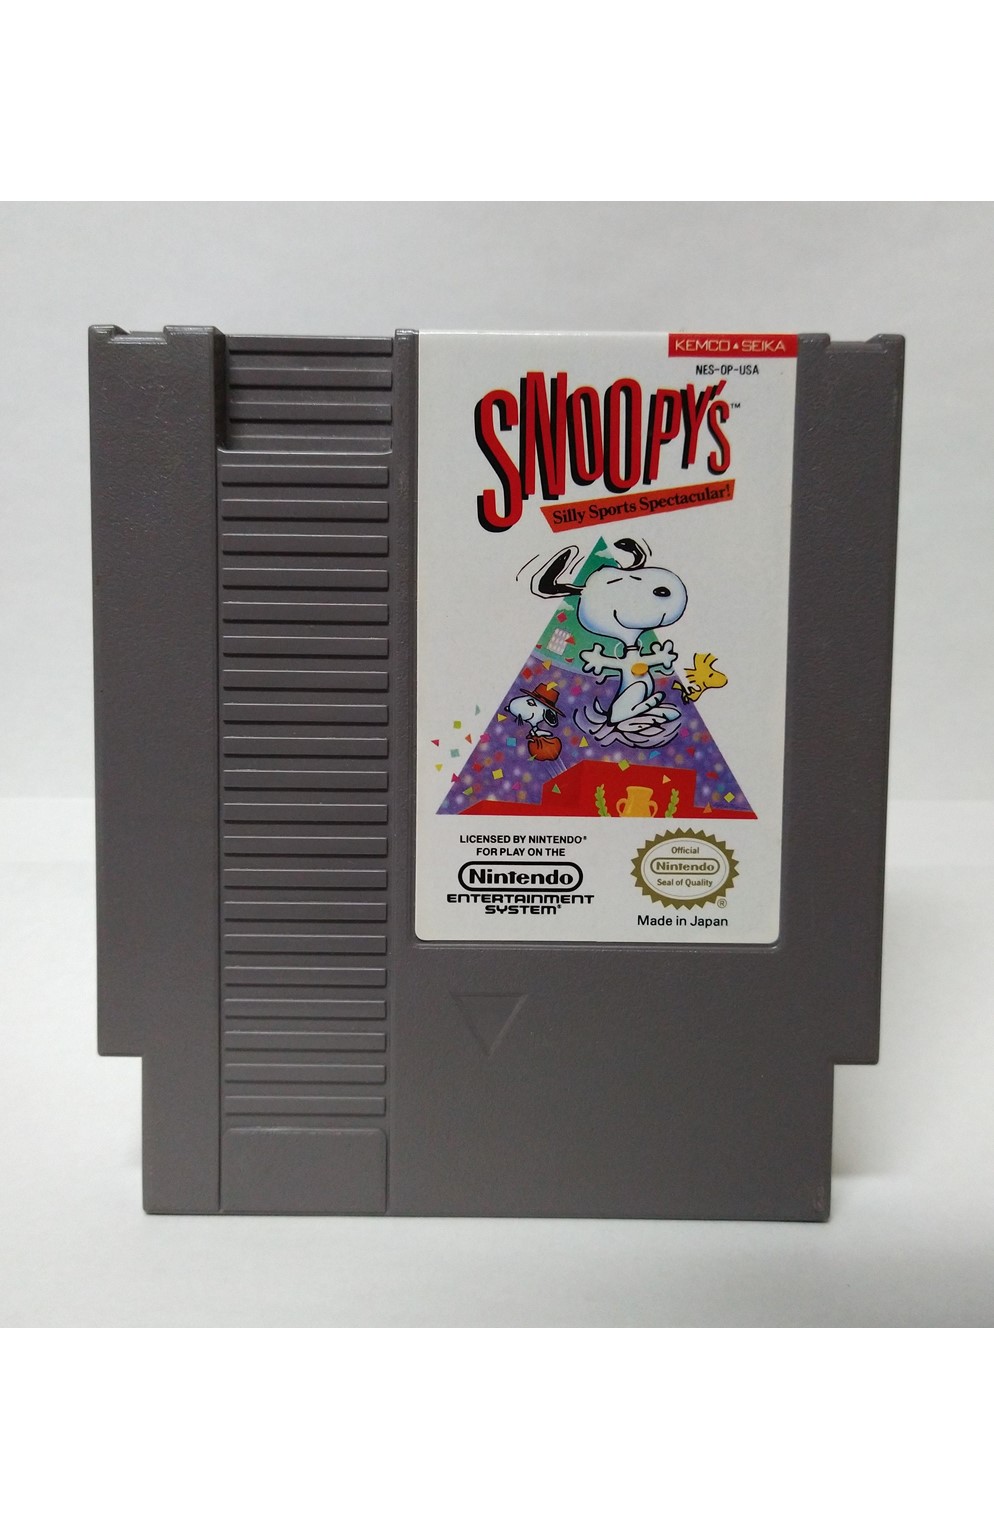 Nintendo Nes Snoopy's Silly Sports Spectacular